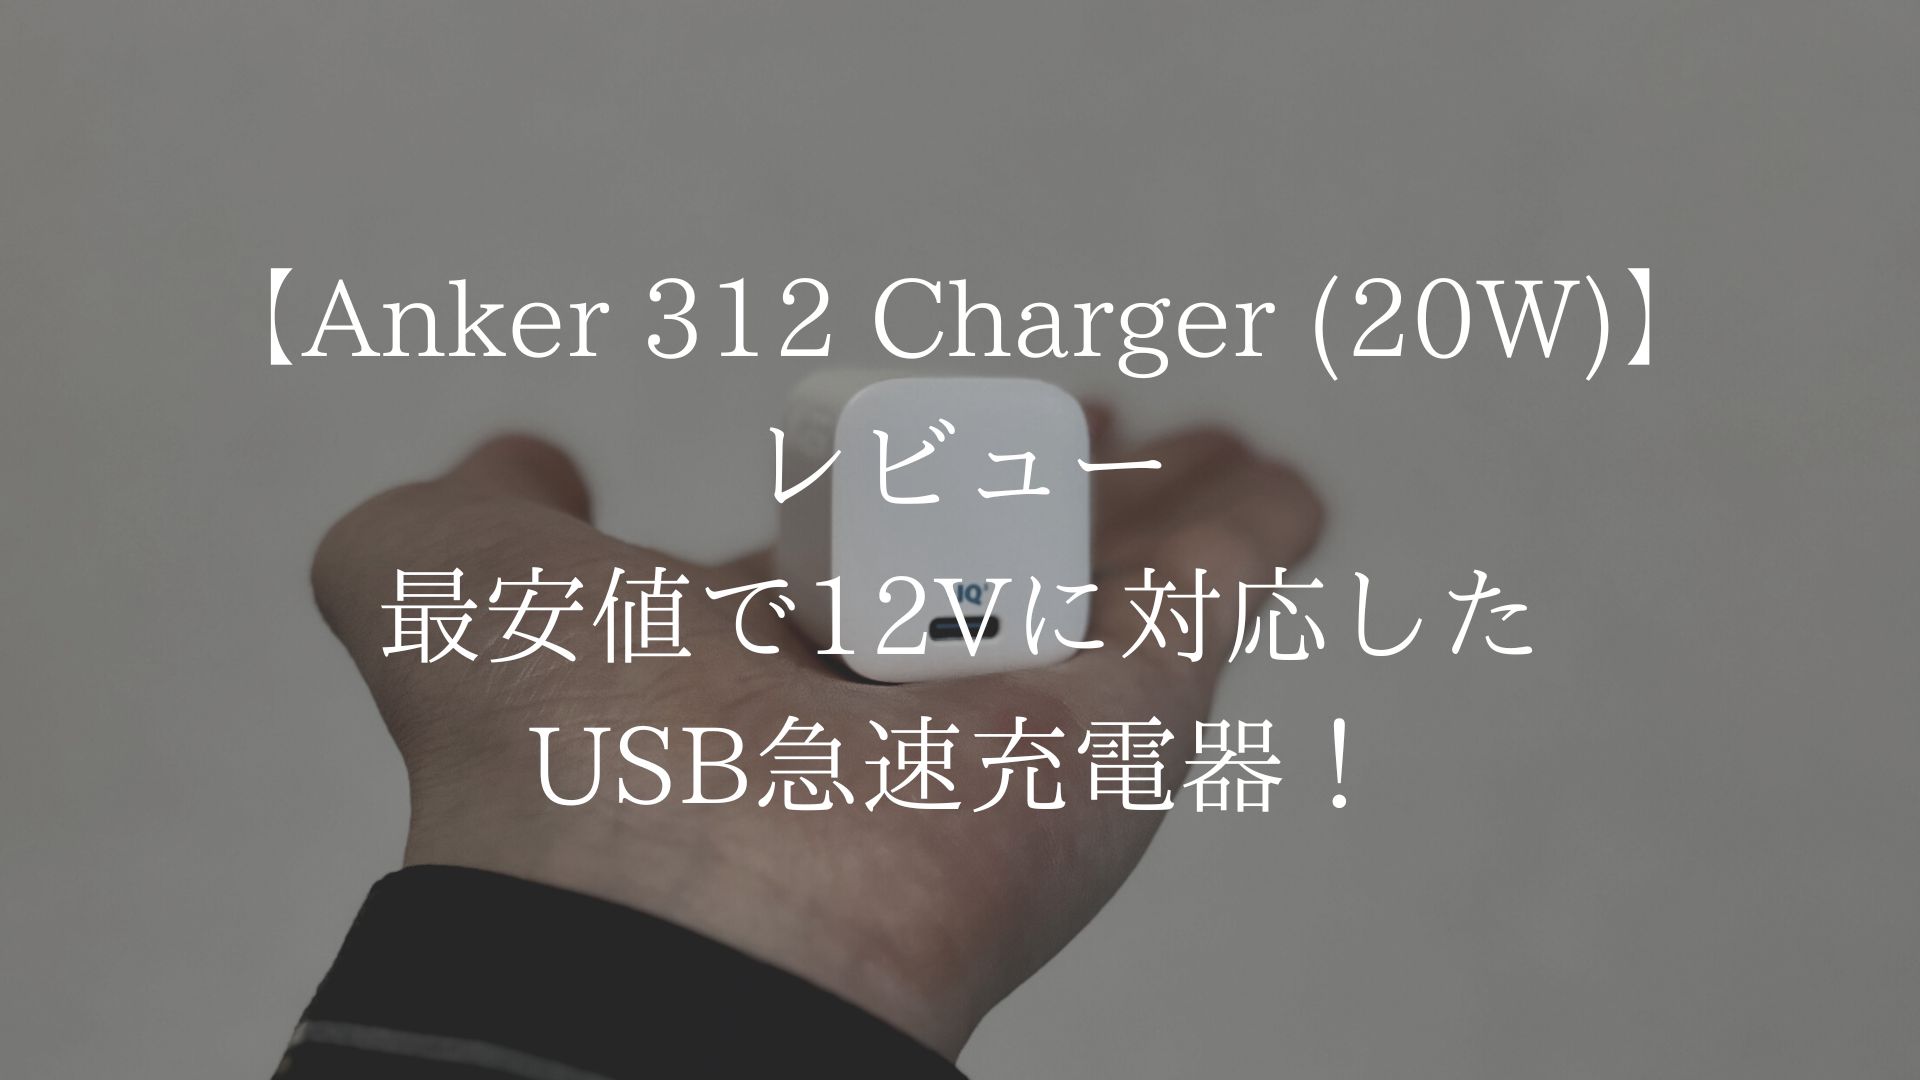 Anker 312 Charger (20W)のアイキャッチ画像